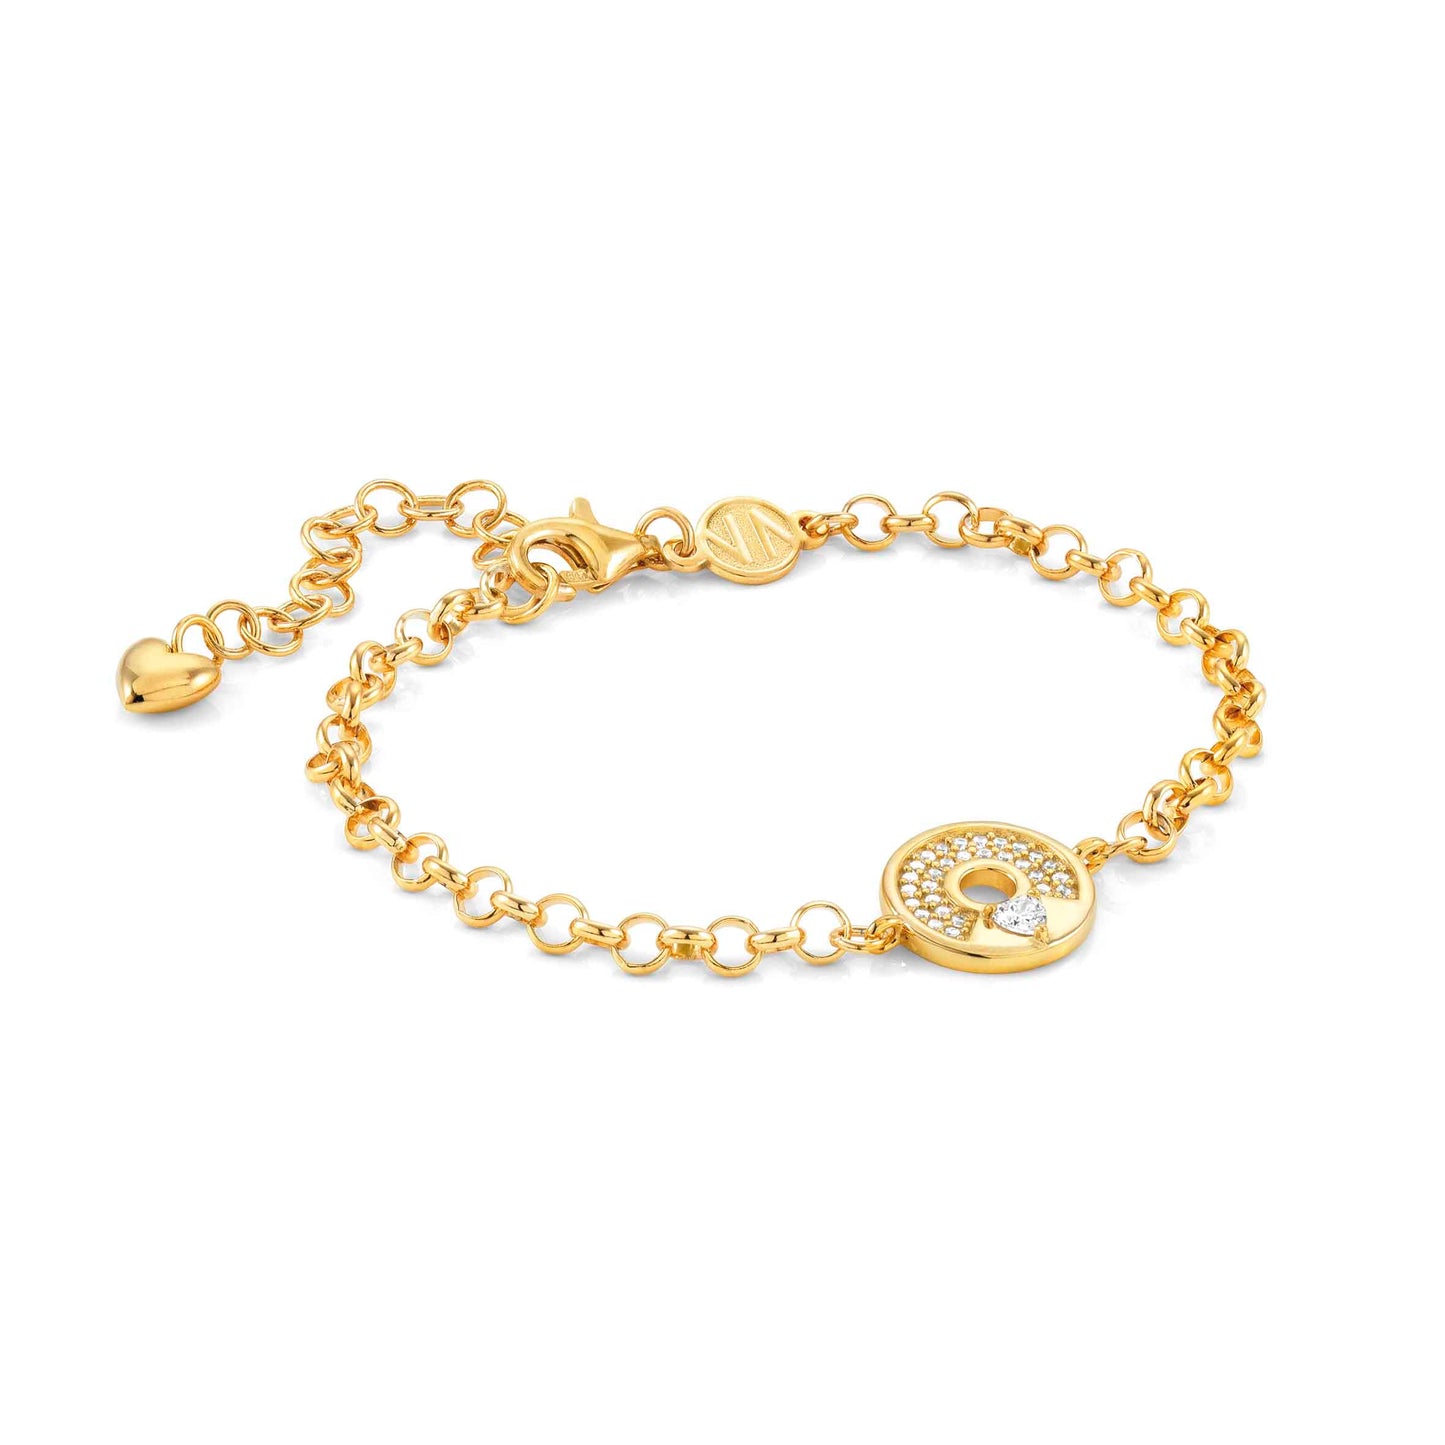 149201/008D SENTIMENTAL bracelet in 925 silver ygp and cubic zirconia (008_Yellow Gold Heart)